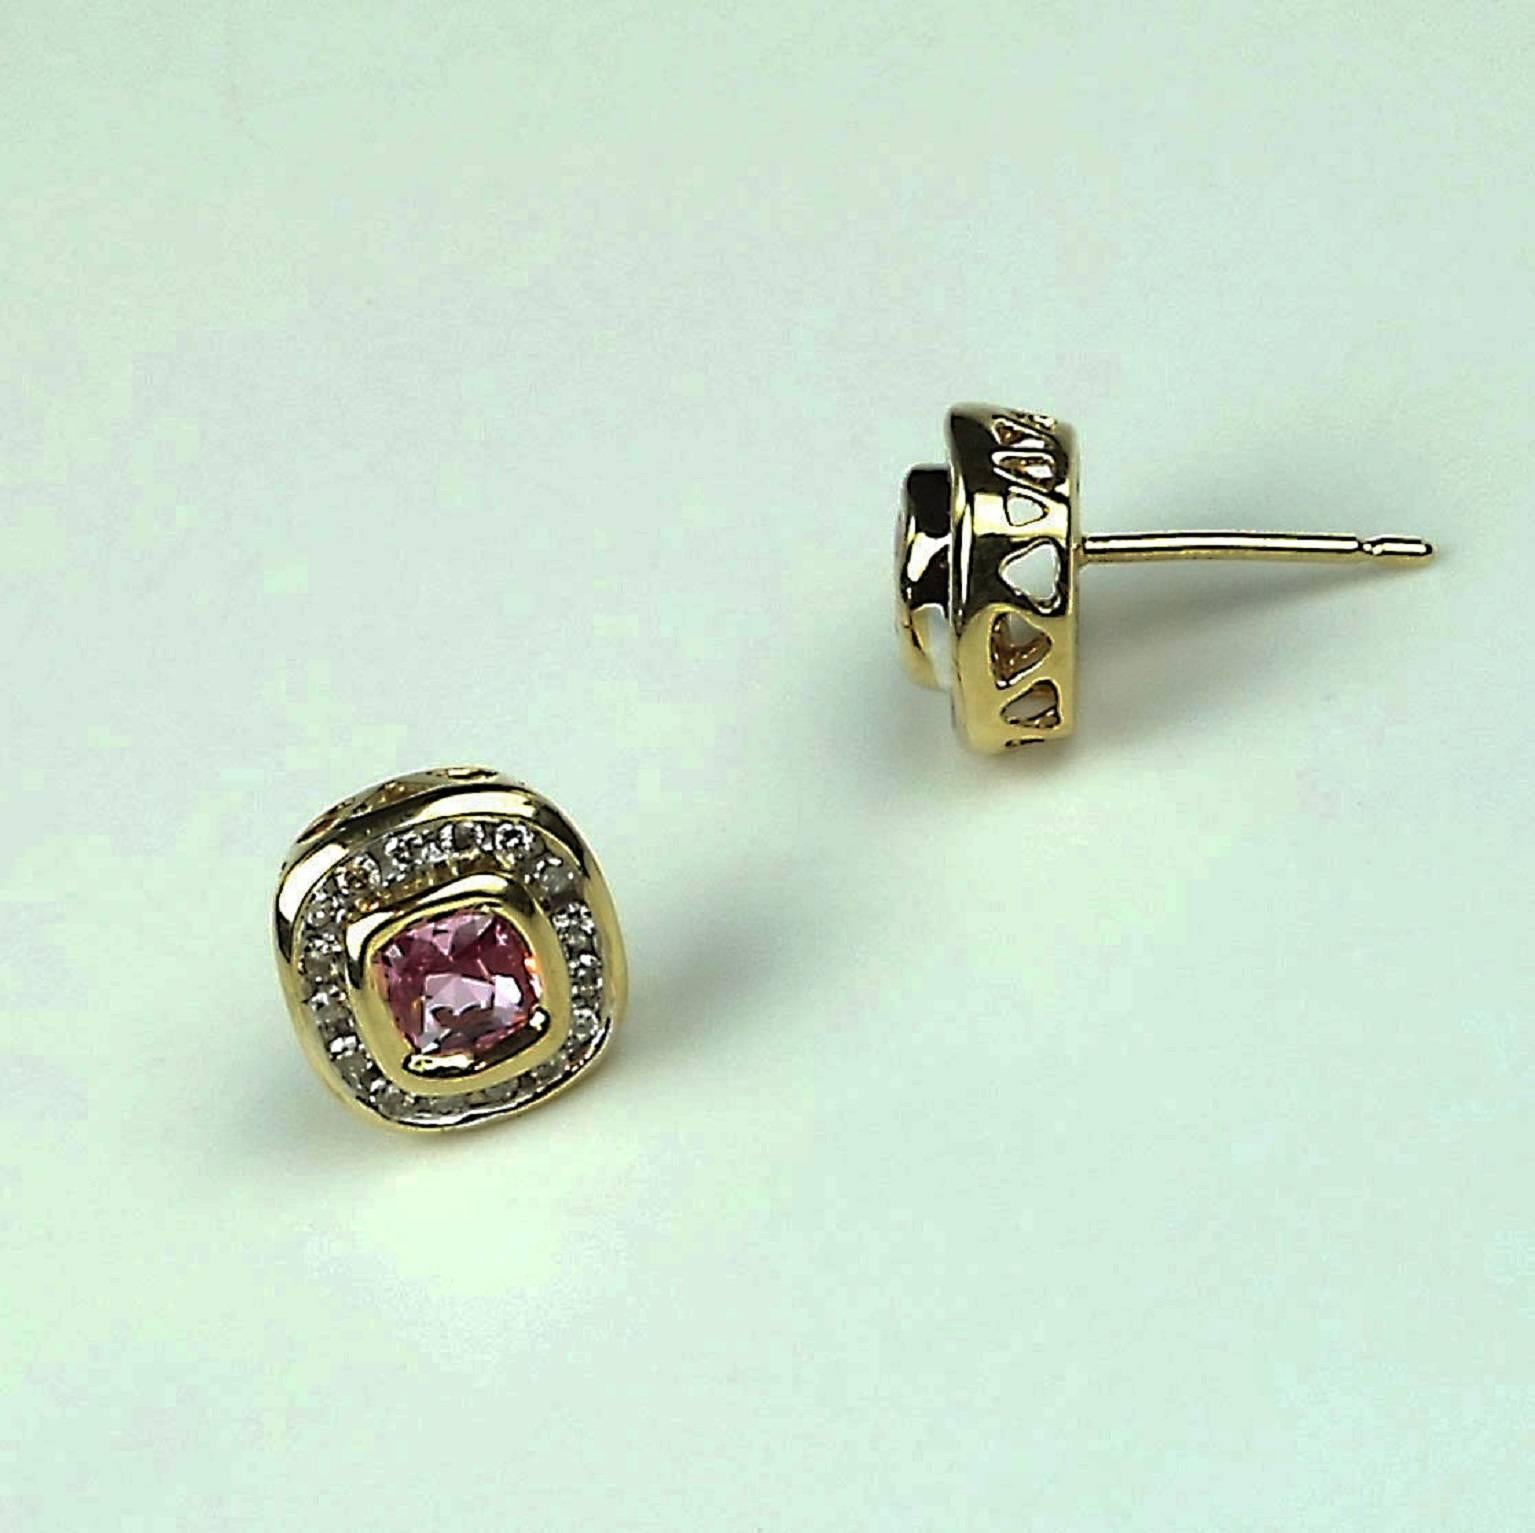 Delightful Pink Tourmalines bezel set in Yellow Gold, surrounded by channel set Diamonds in Stud Earrings.  The cushion cut, sparkling Pink Tourmalines are enhanced by the surrounding Diamonds and yellow gold.  The open work of the gold setting